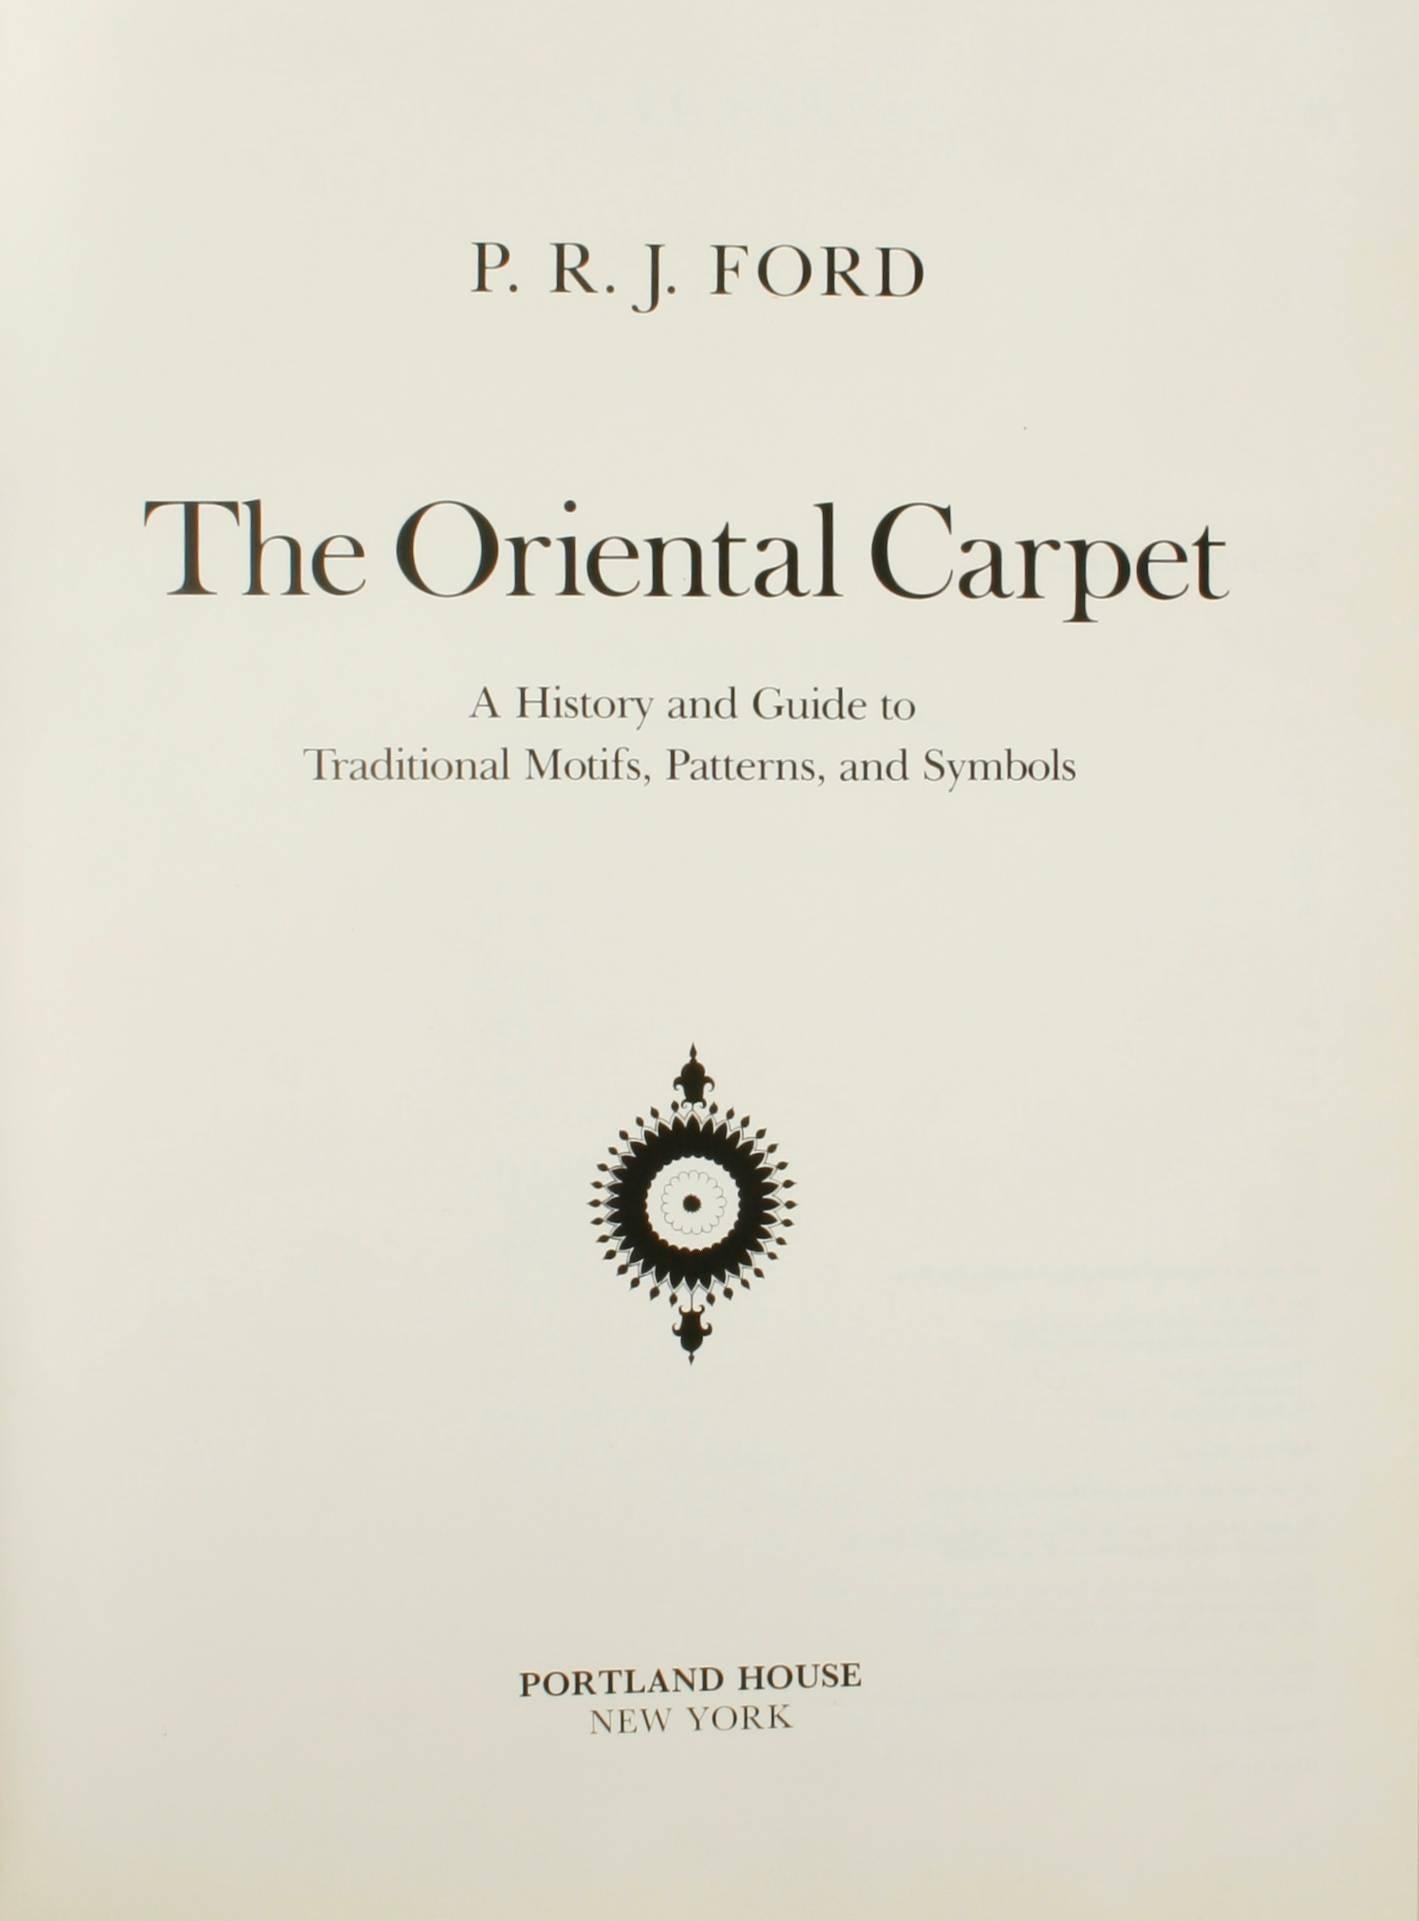 The oriental carpet: A history and guide to traditional motifs, patterns and symbols by P. R. J. Ford. NY: Portland House, 1989. 2nd edition hardcover. A history and guide to traditional motifs, patterns and symbols with over 800 illustrations,